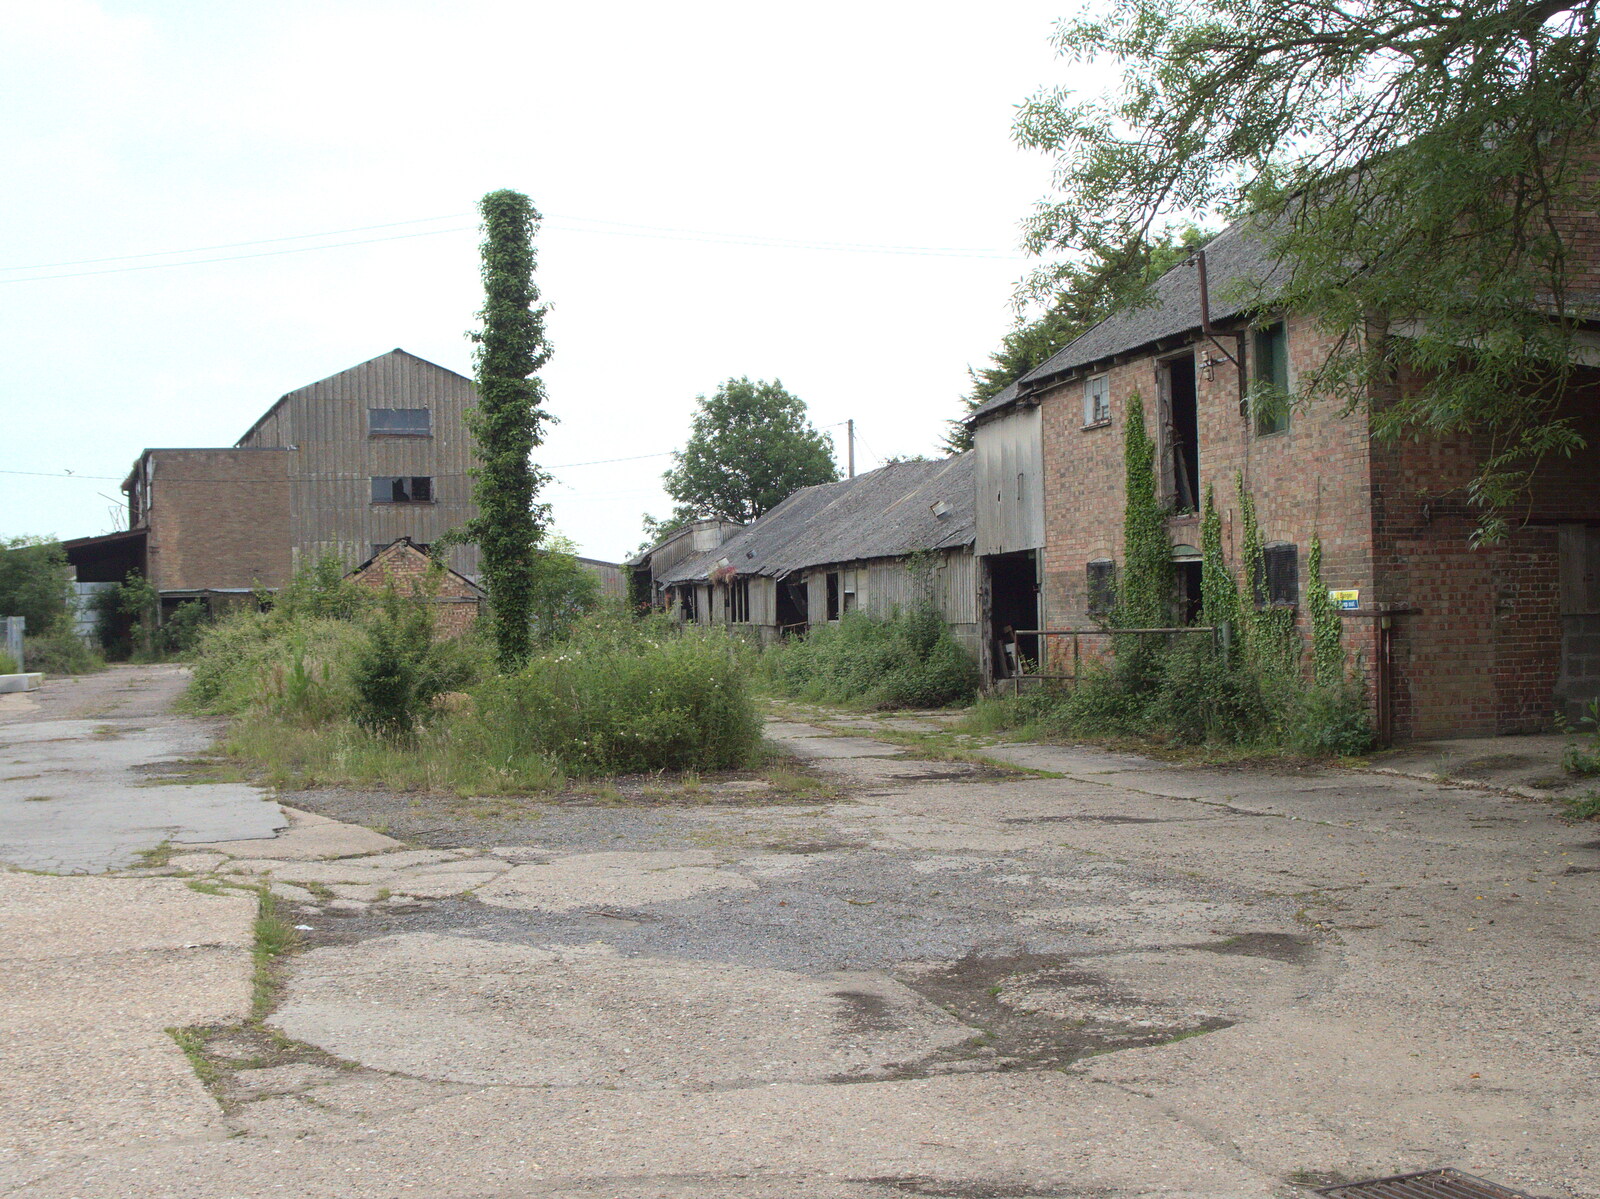 Derelict warehouse and buildings at Kenton from The BSCC at Earl Soham and at Colin and Jill's, Eye, Suffolk - 26th June 2021